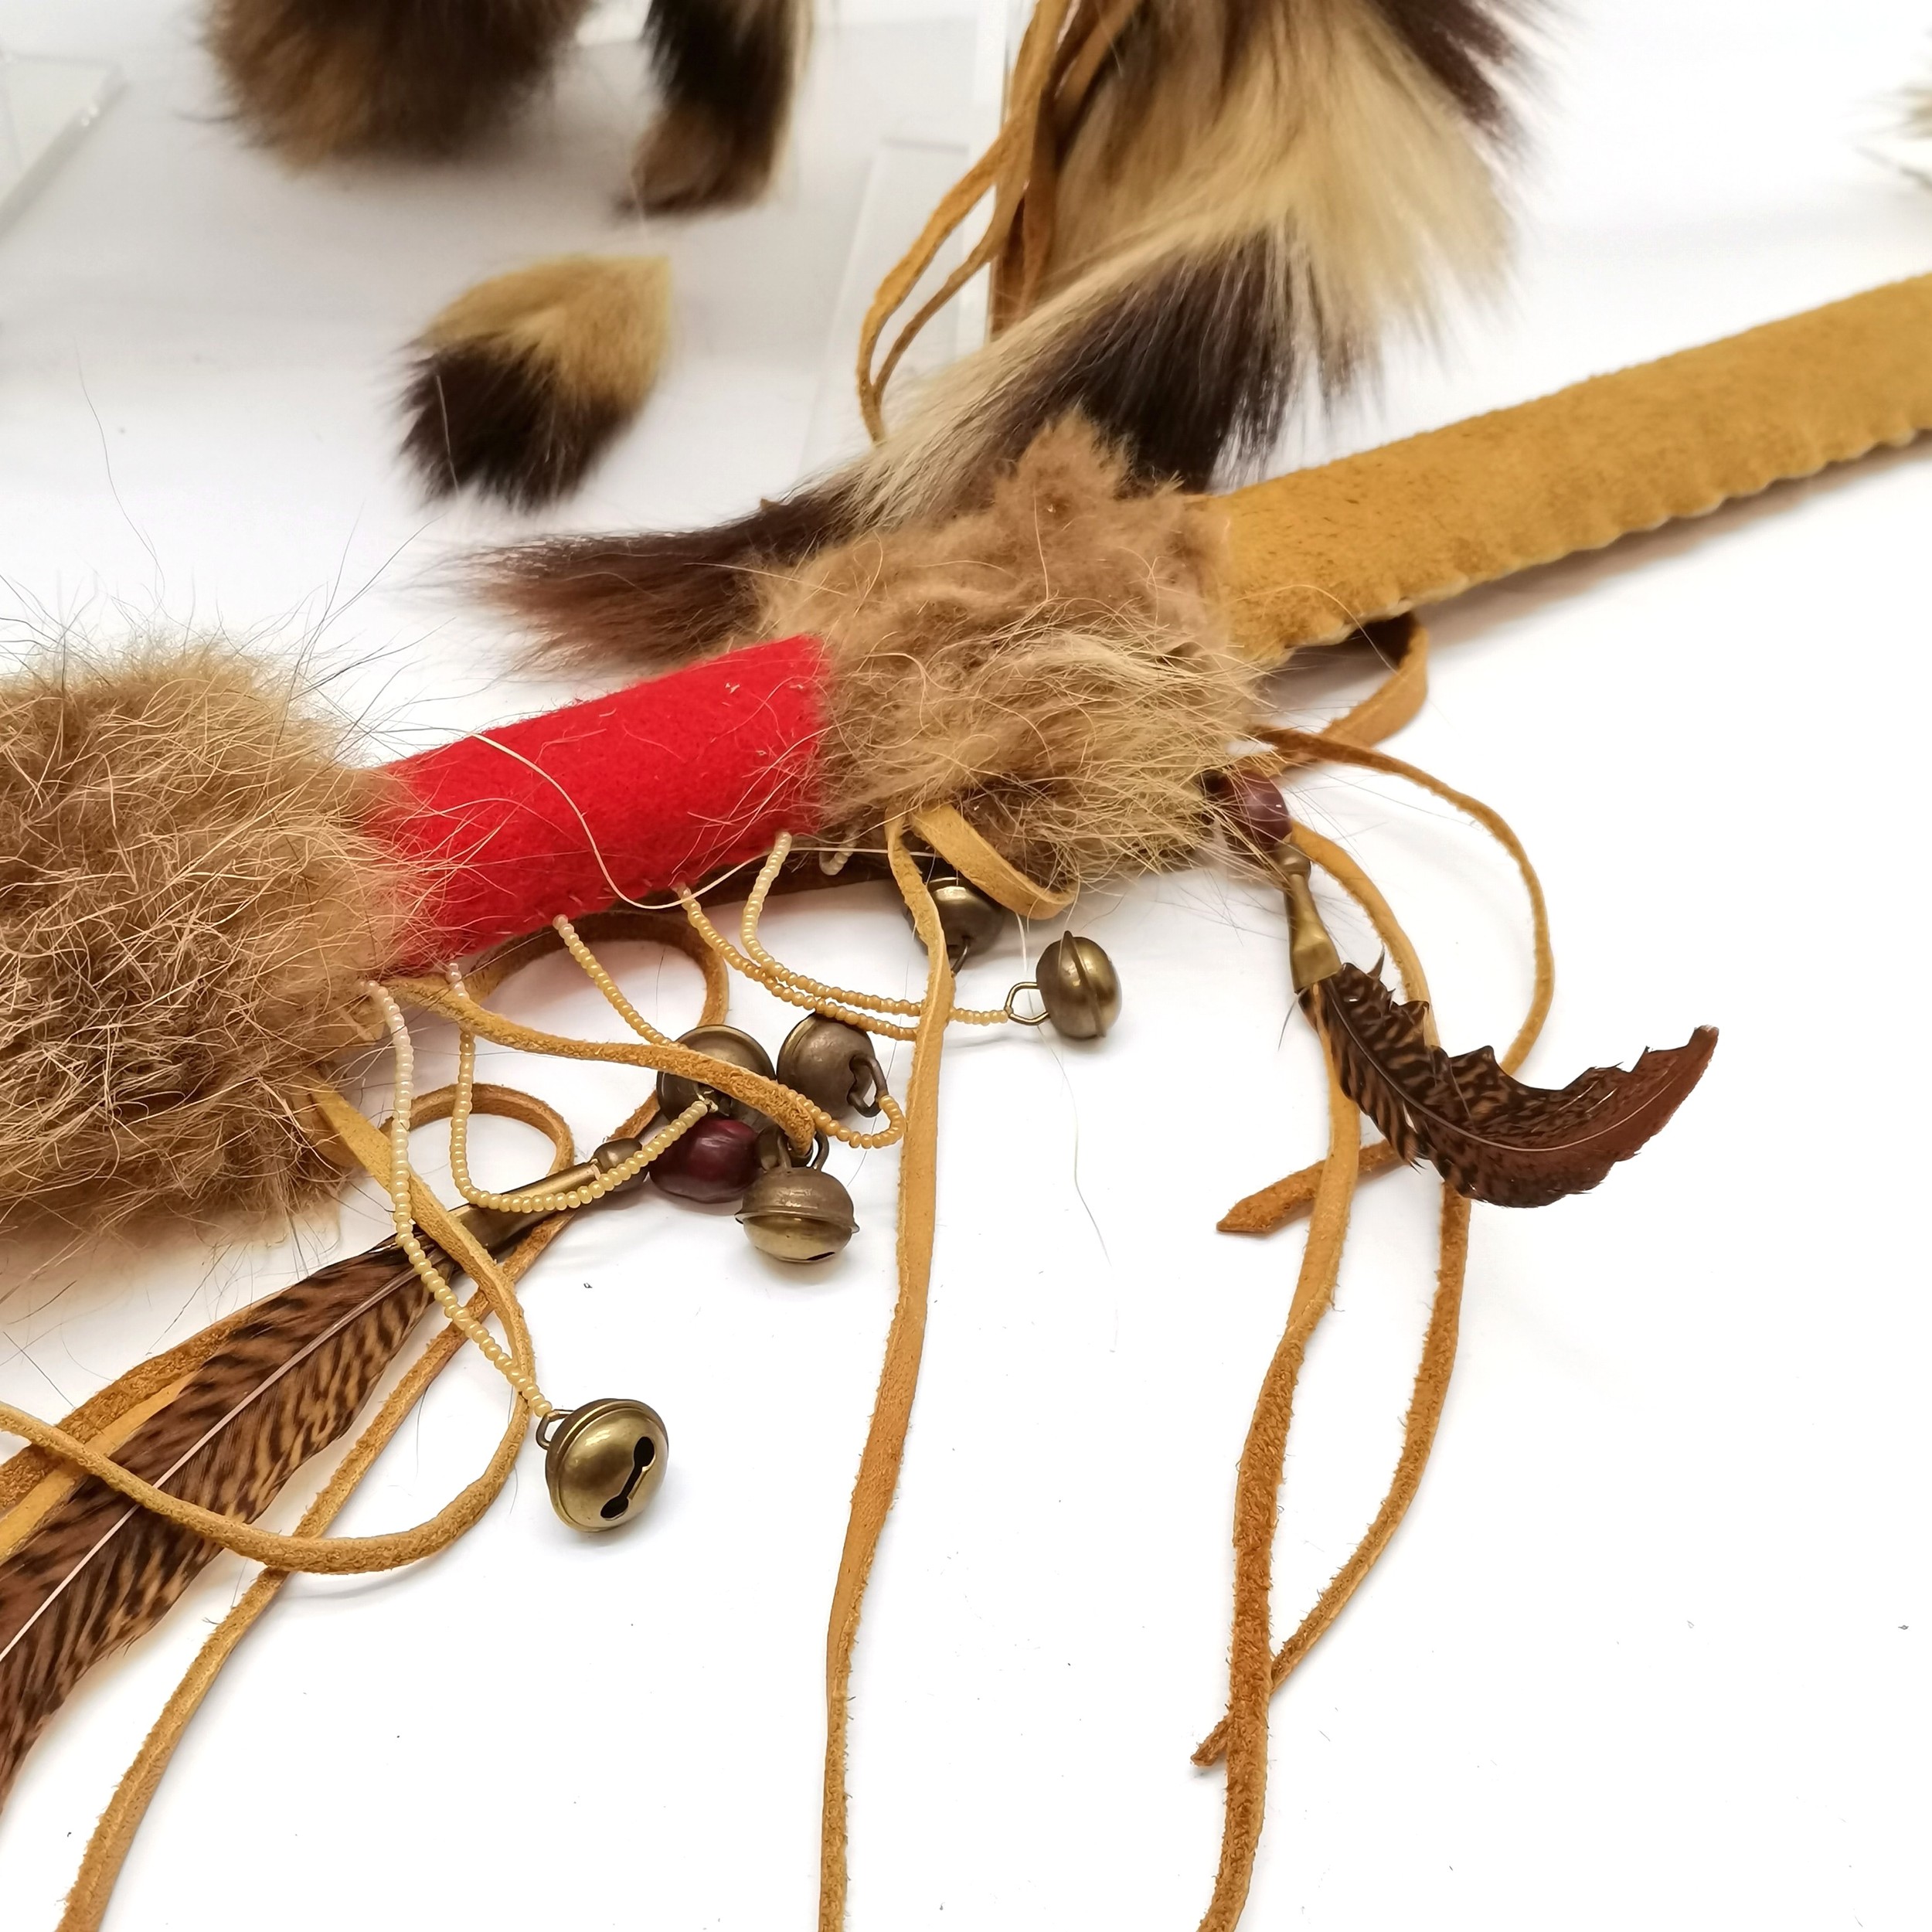 Native North American Indian shaman head-dress & stick rattle (68cm) with native beadwork decoration - Image 5 of 6